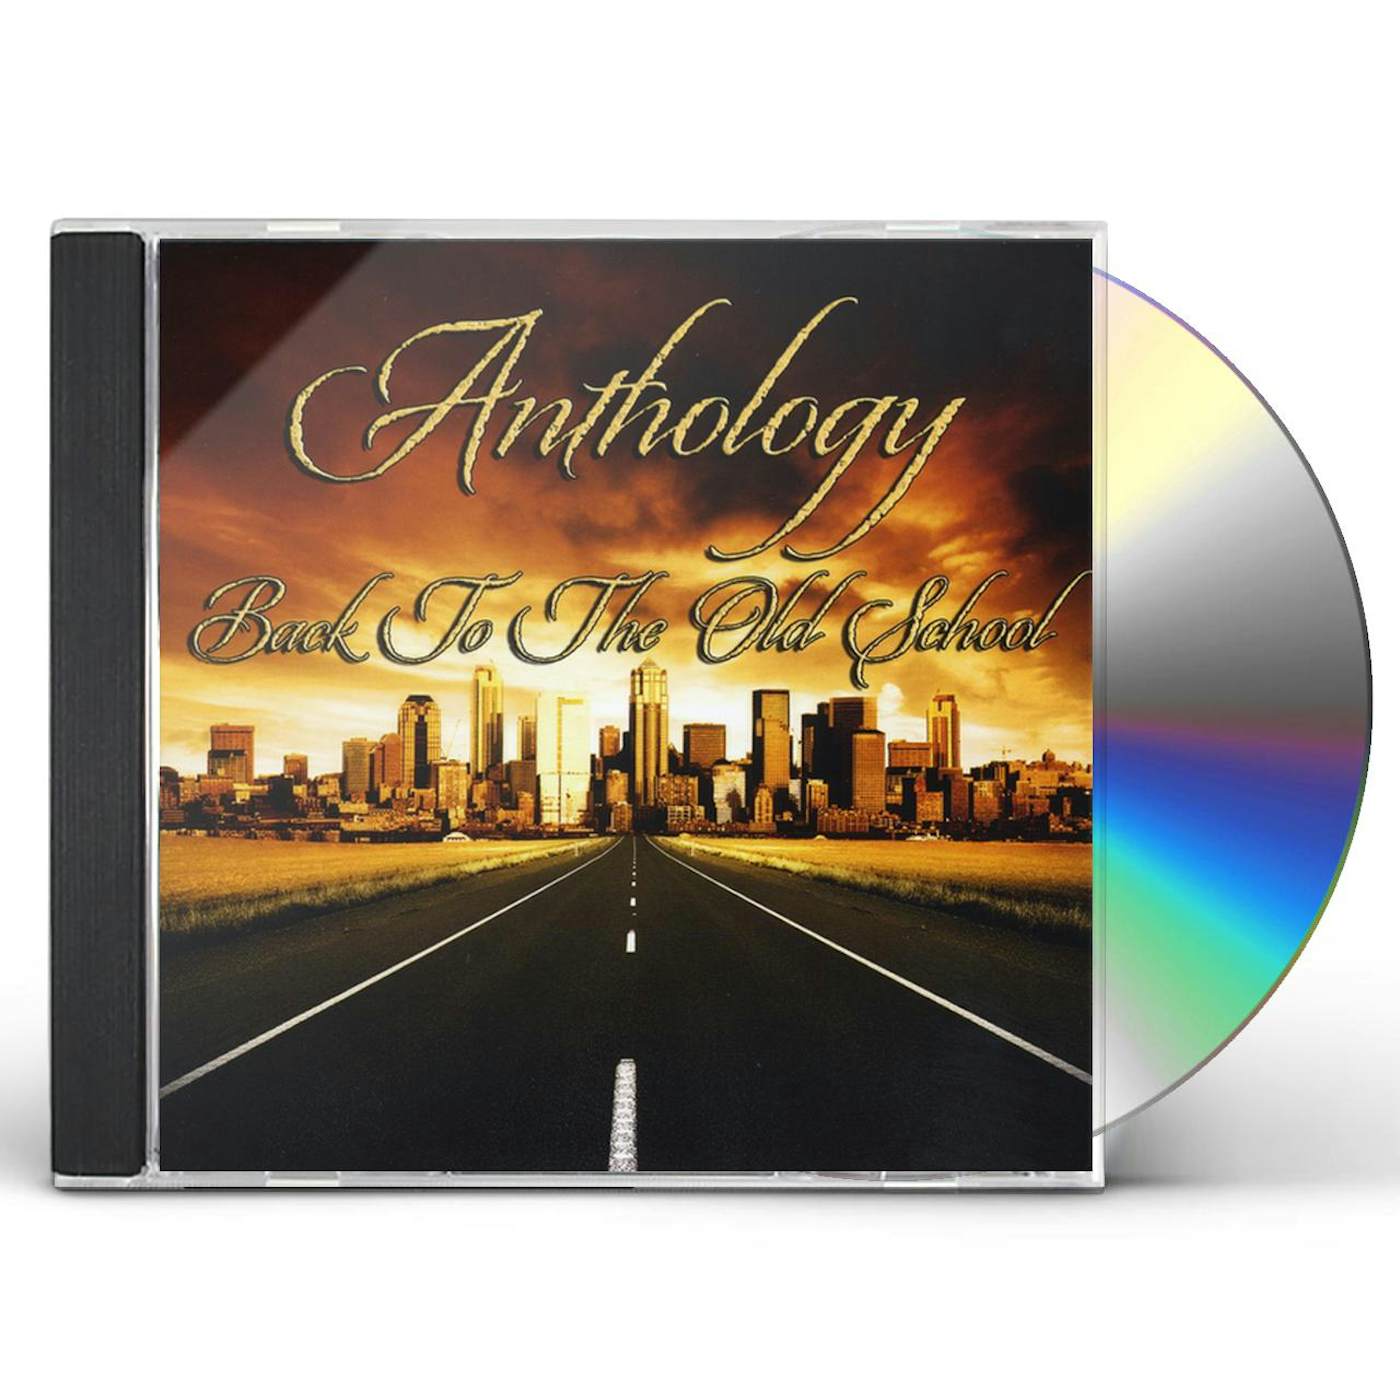 Anthology BACK TO THE OLD SCHOOL CD